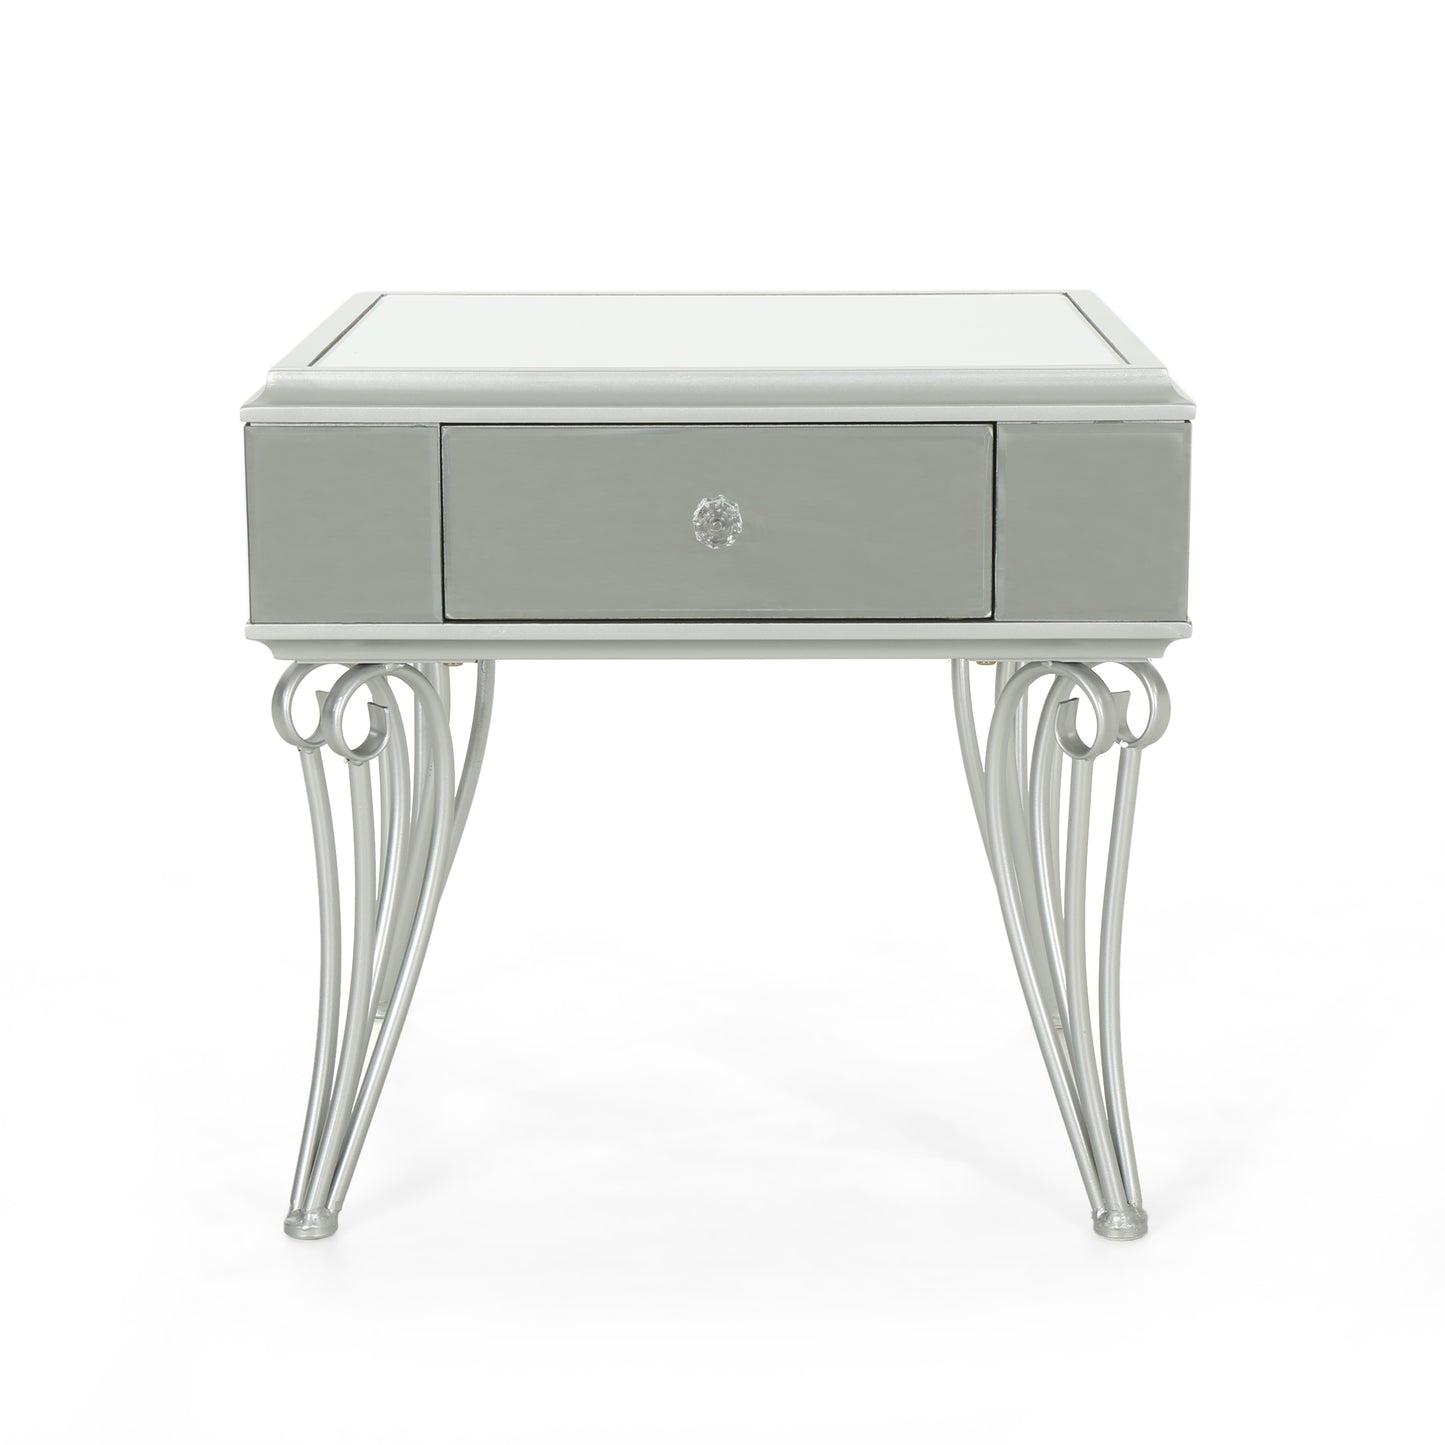 Mamie Modern Mirrored Accent Table with Drawer, Tempered Glass